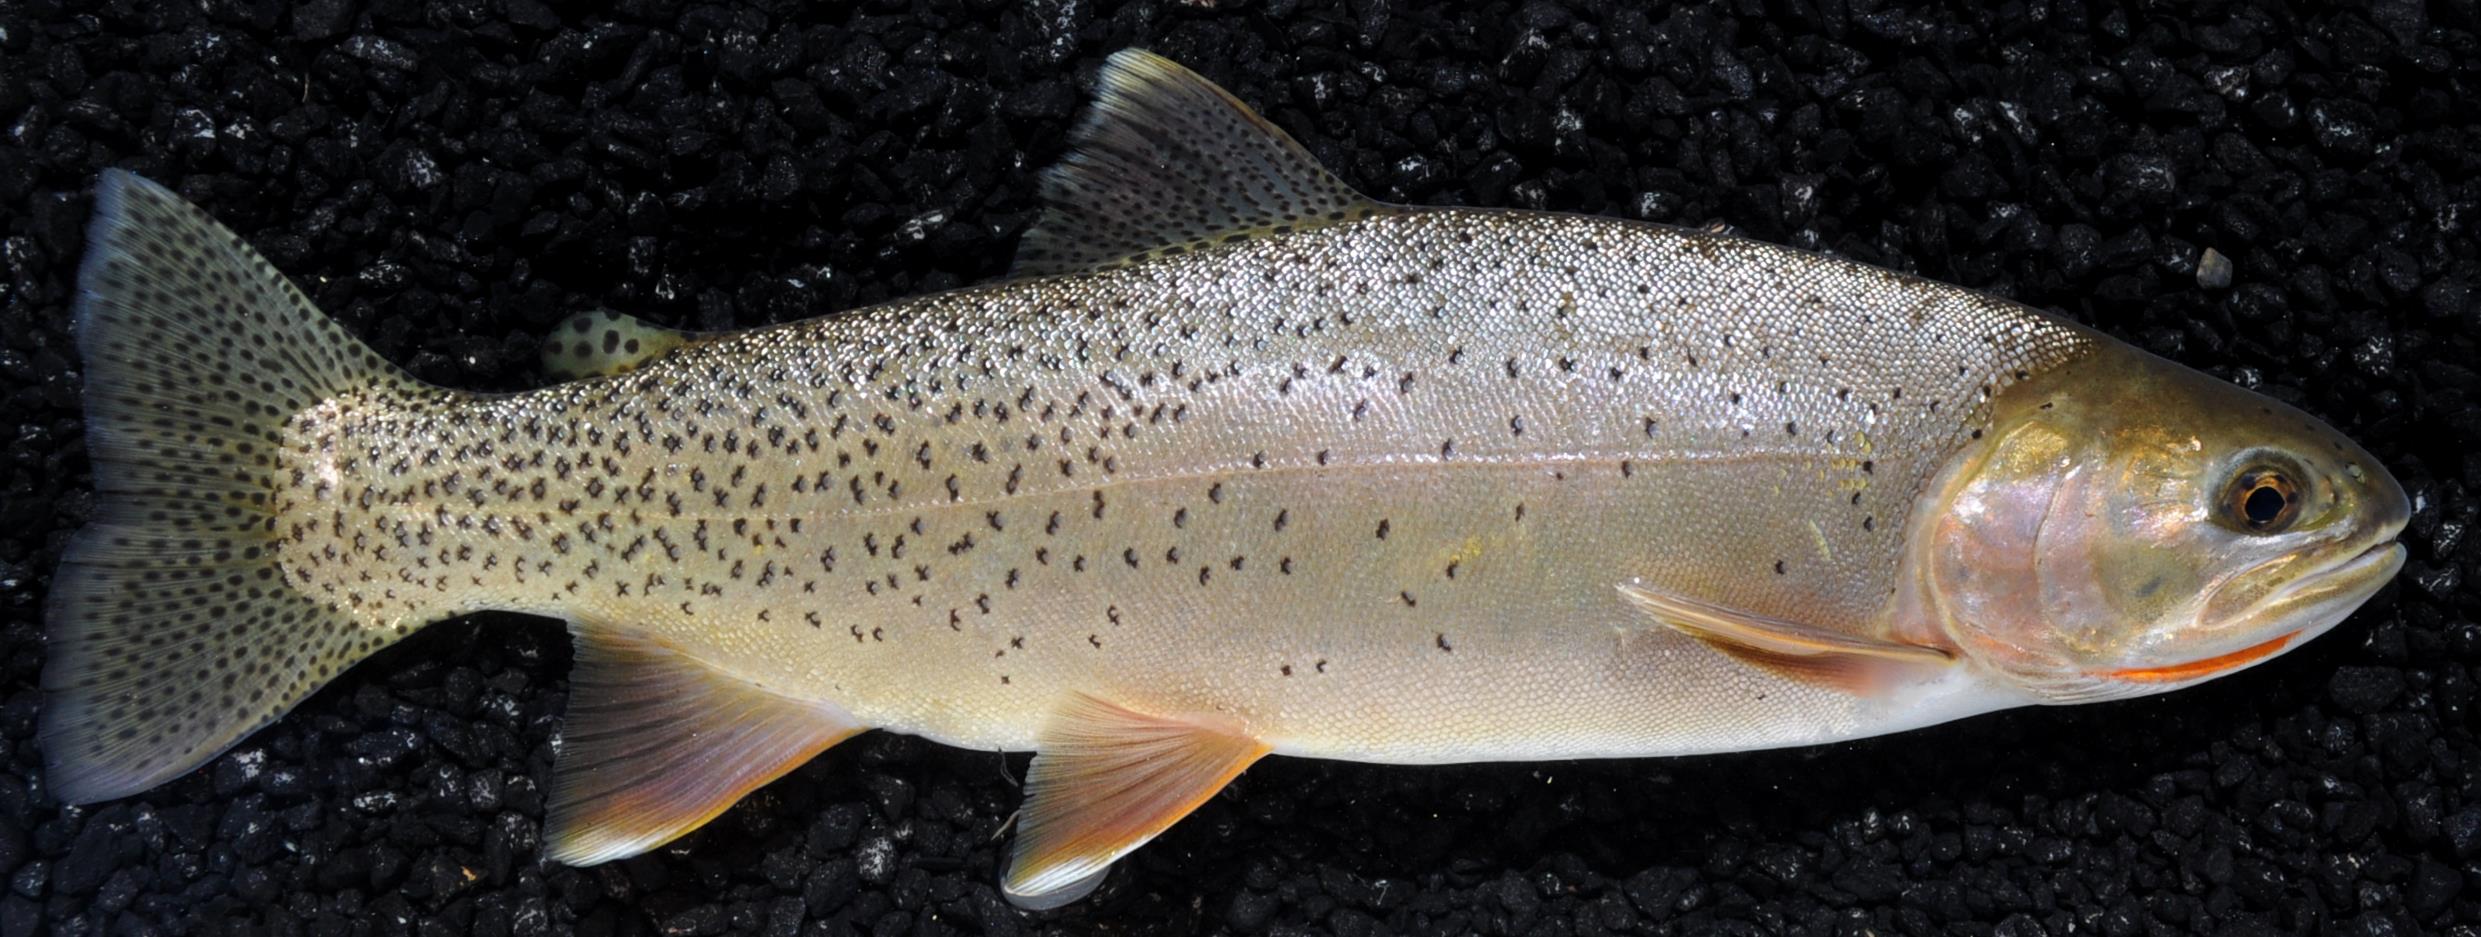 Getting paid to fish: Brown trout bonus payments increasing at